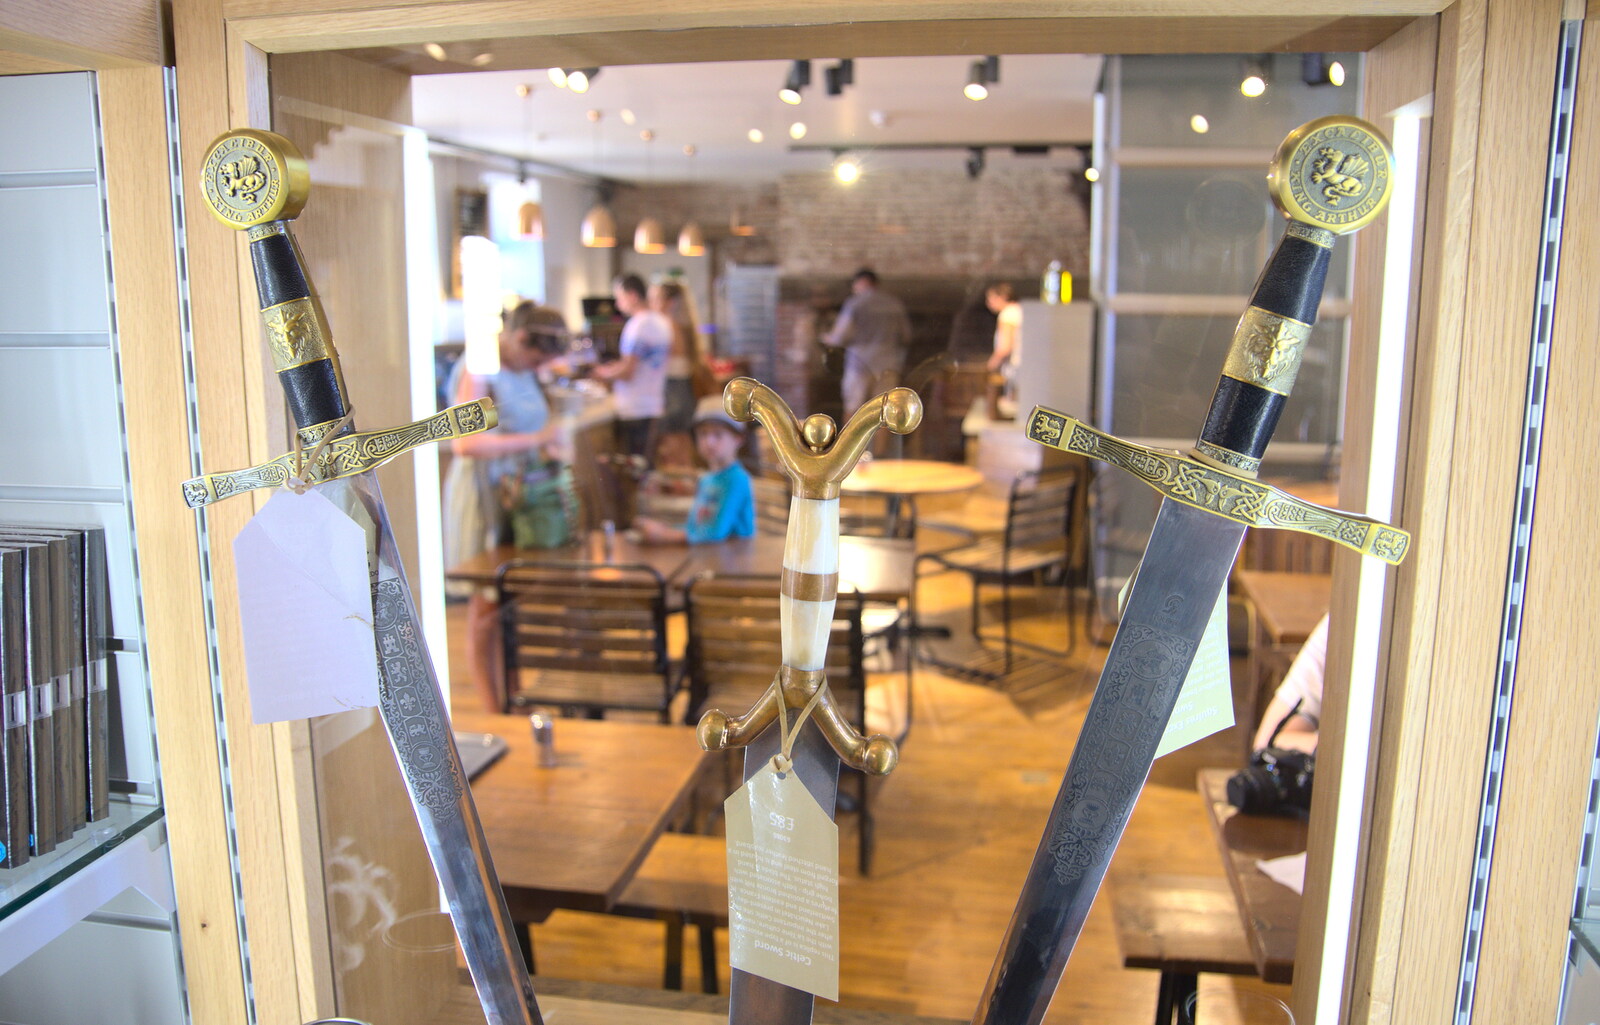 The English Heritage shop is selling actual swords from A Postcard from the Castle on the Hill, Framlingham, Suffolk - 14th July 2018